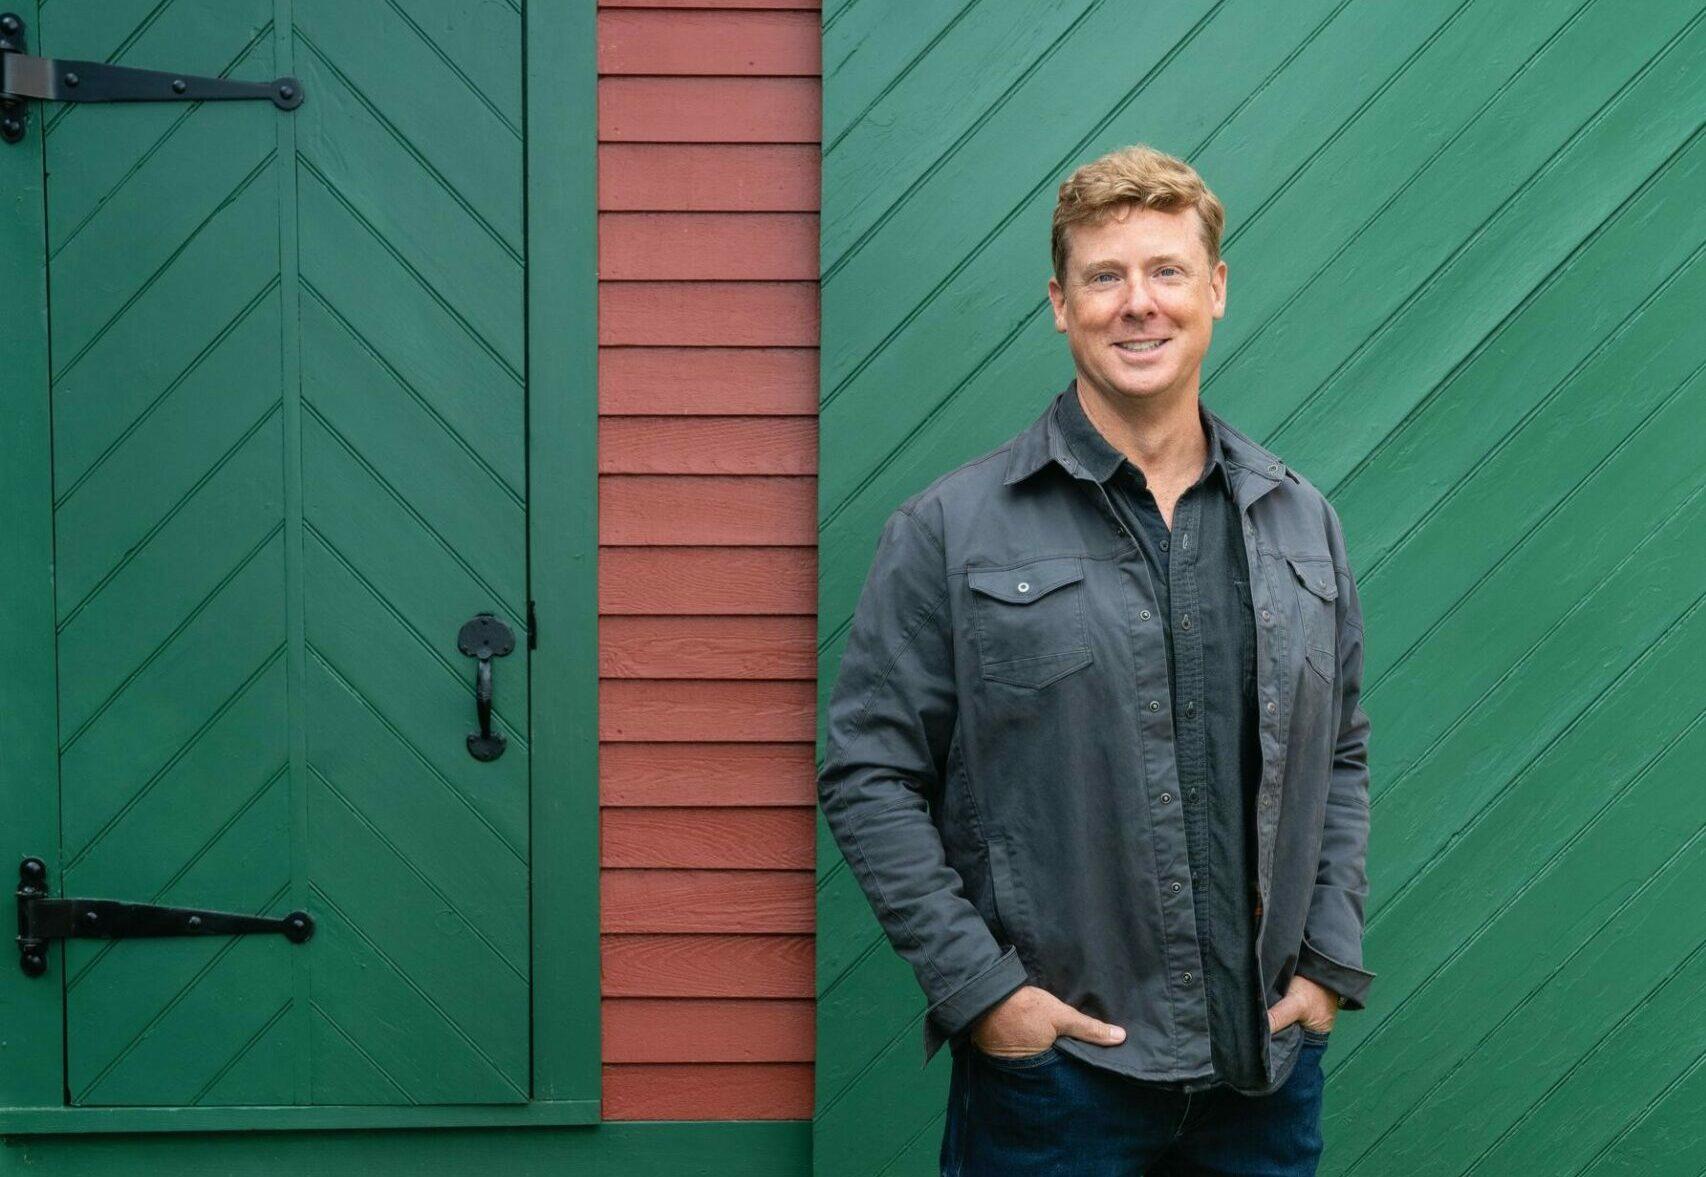 “This Old House” host Kevin O’Connor headlines Capital Remodel + Garden Show